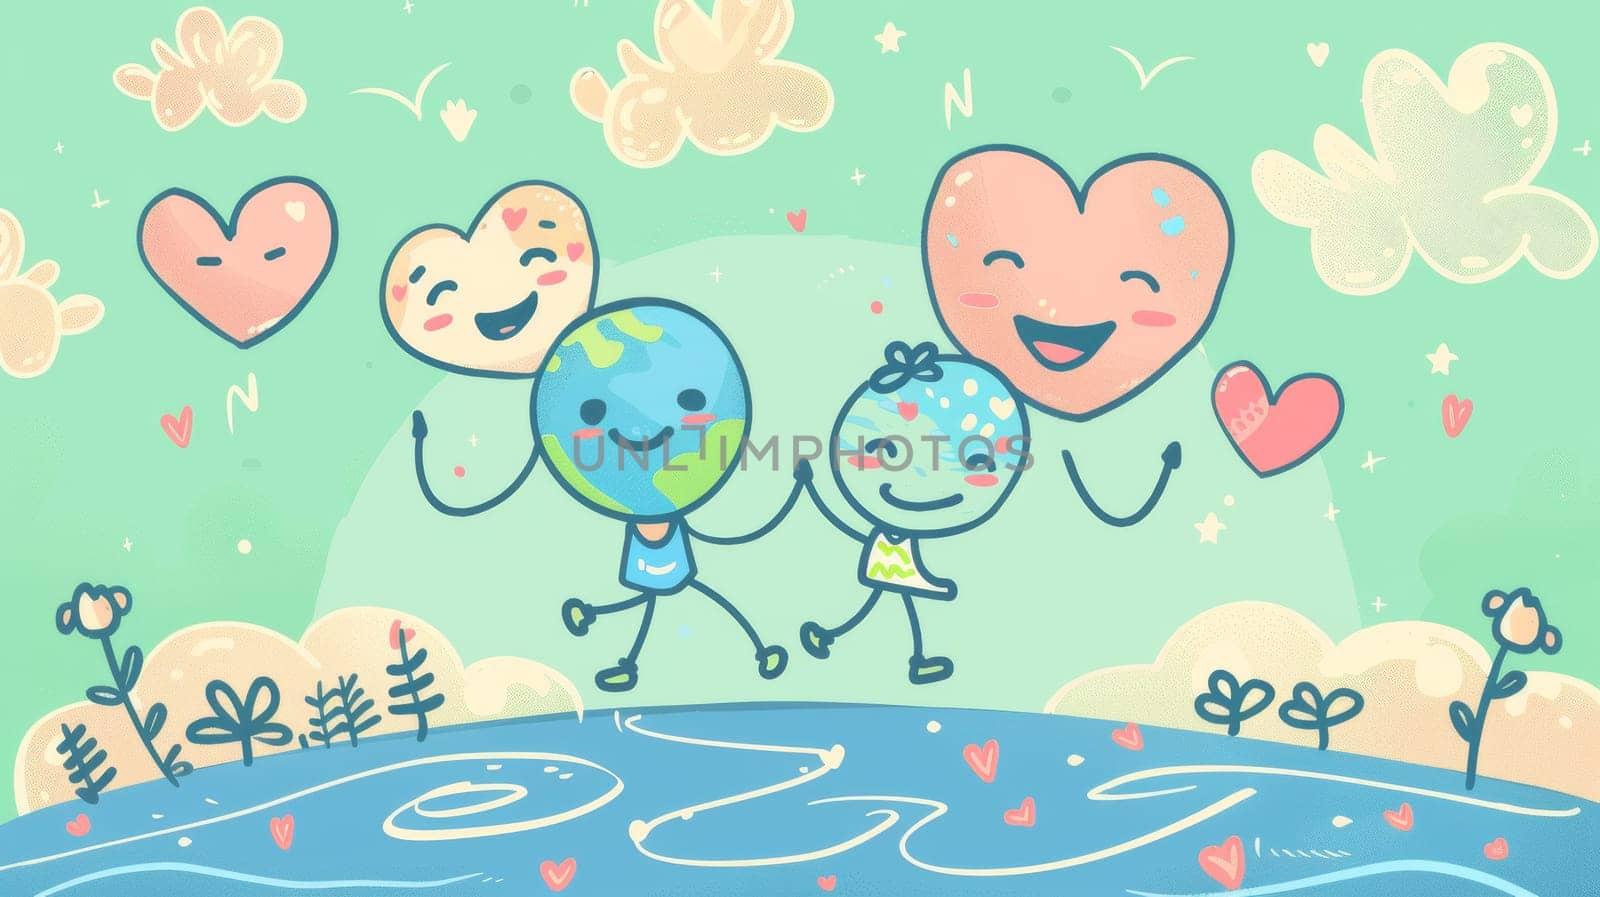 Design for web, banner, campaign, social media post, on 7 April. Hand drawn groovy character style of earth working out, exercise, heart, cloud.